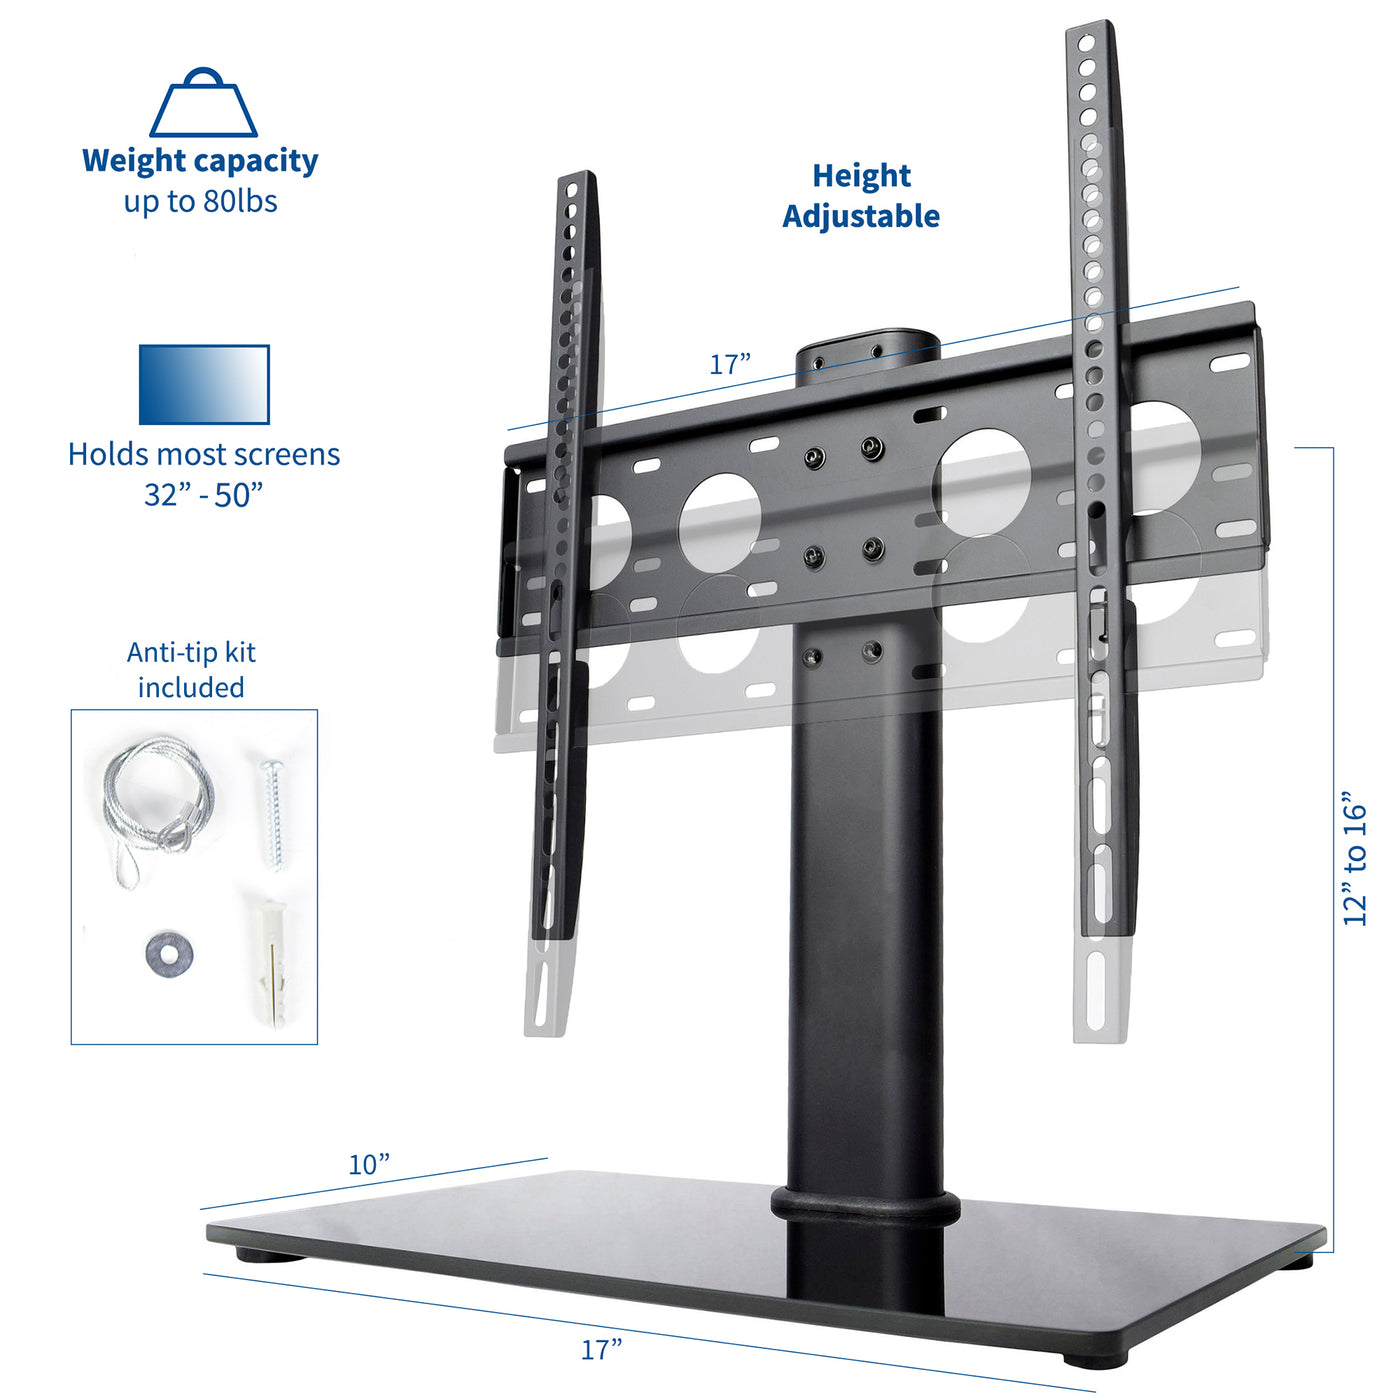 Heavy-duty tabletop TV stand with height adjustment.